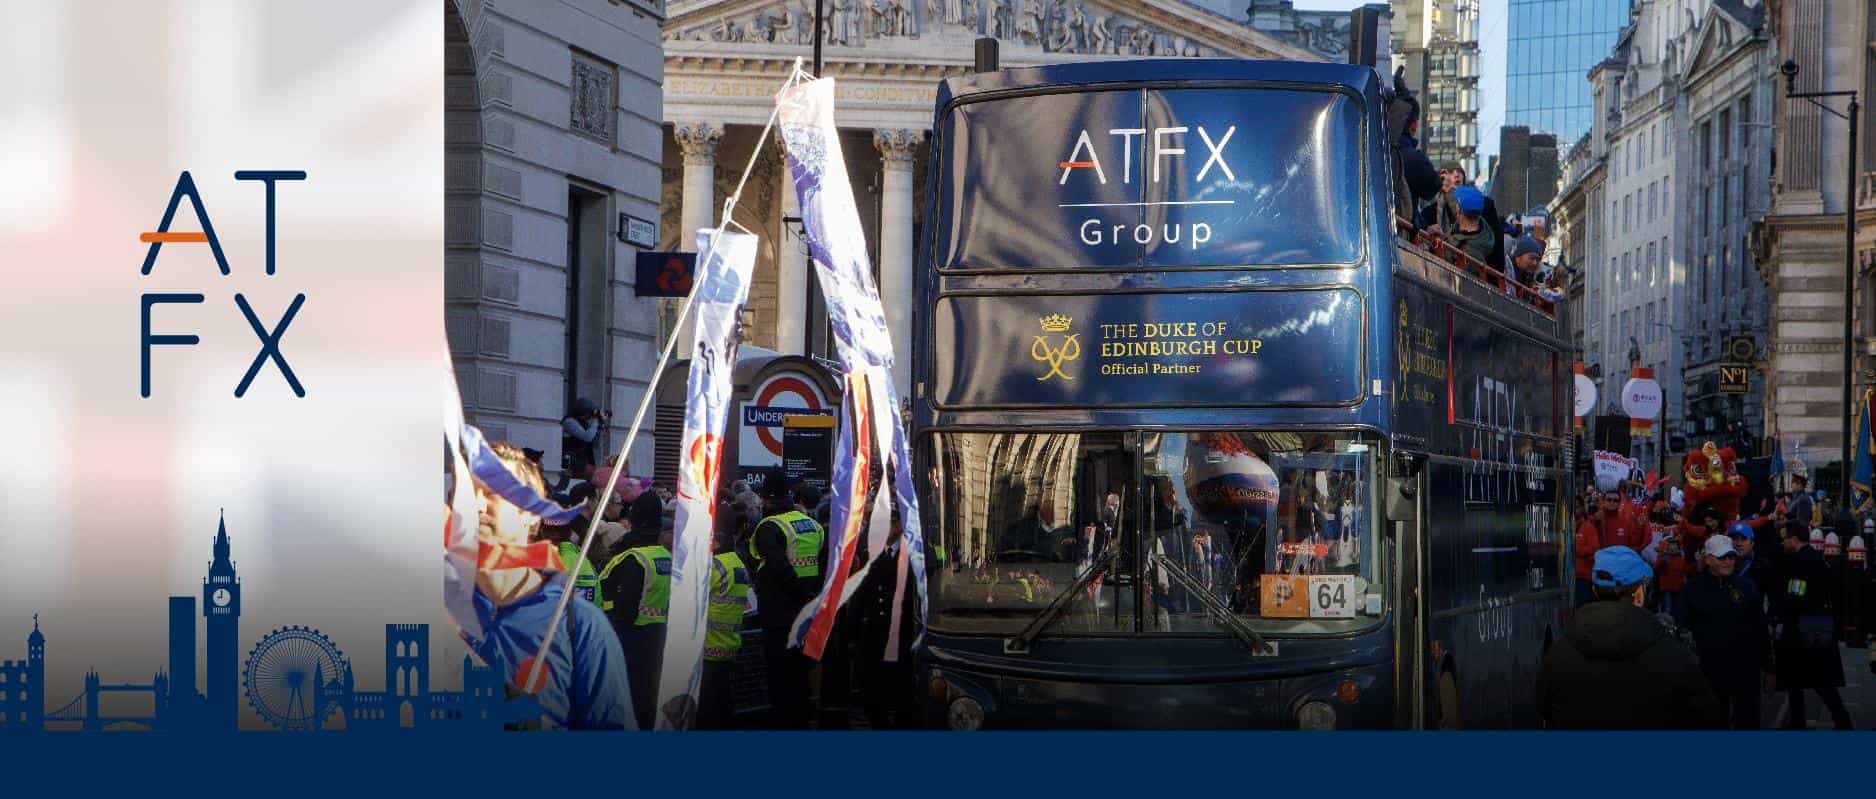 shine2023London Financial City Long Float Parade,ATFXBlue Tour Blooms with Smart Style515 / author:atfx2019 / PostsID:1726821